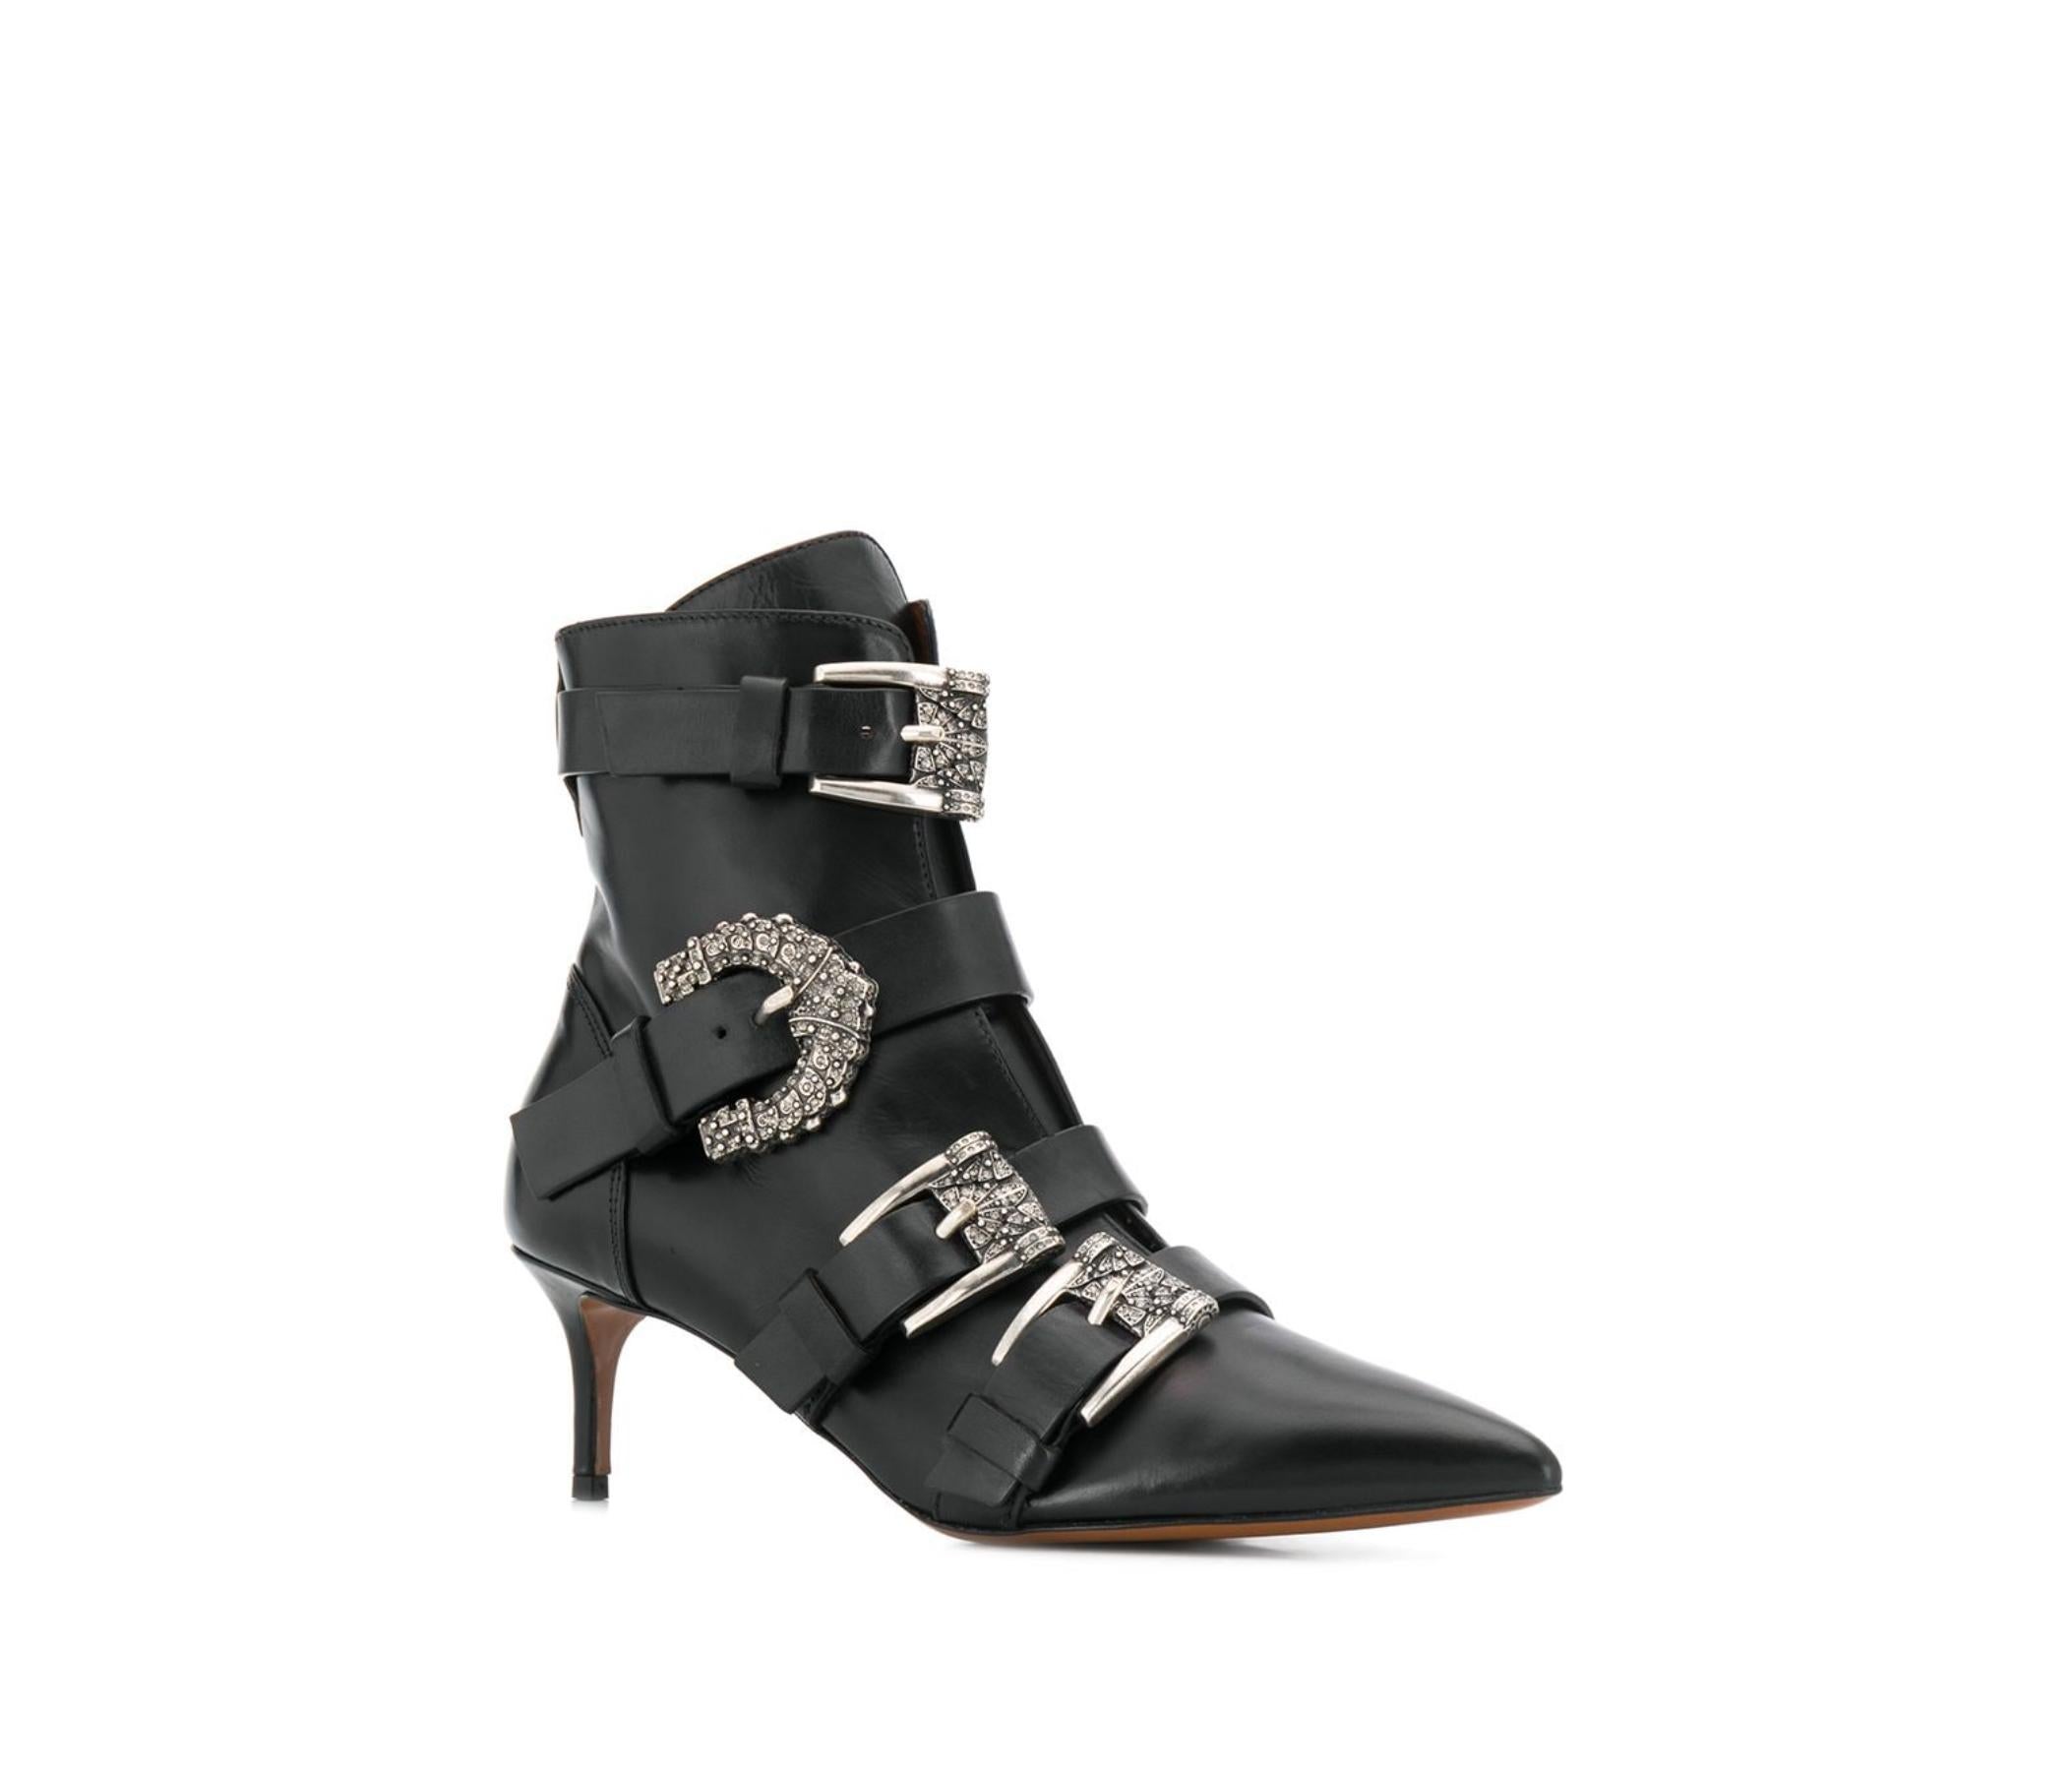 The Etro Fall 2019 Runway side buckle black leather ankle boots features embellished buckles, a pointed toe, and 2.4 inch heel. Brand new with shoebox included. Made in Italy.

Size: 39 (IT)

Measurements (taken from Italian size 39):
Circumference: